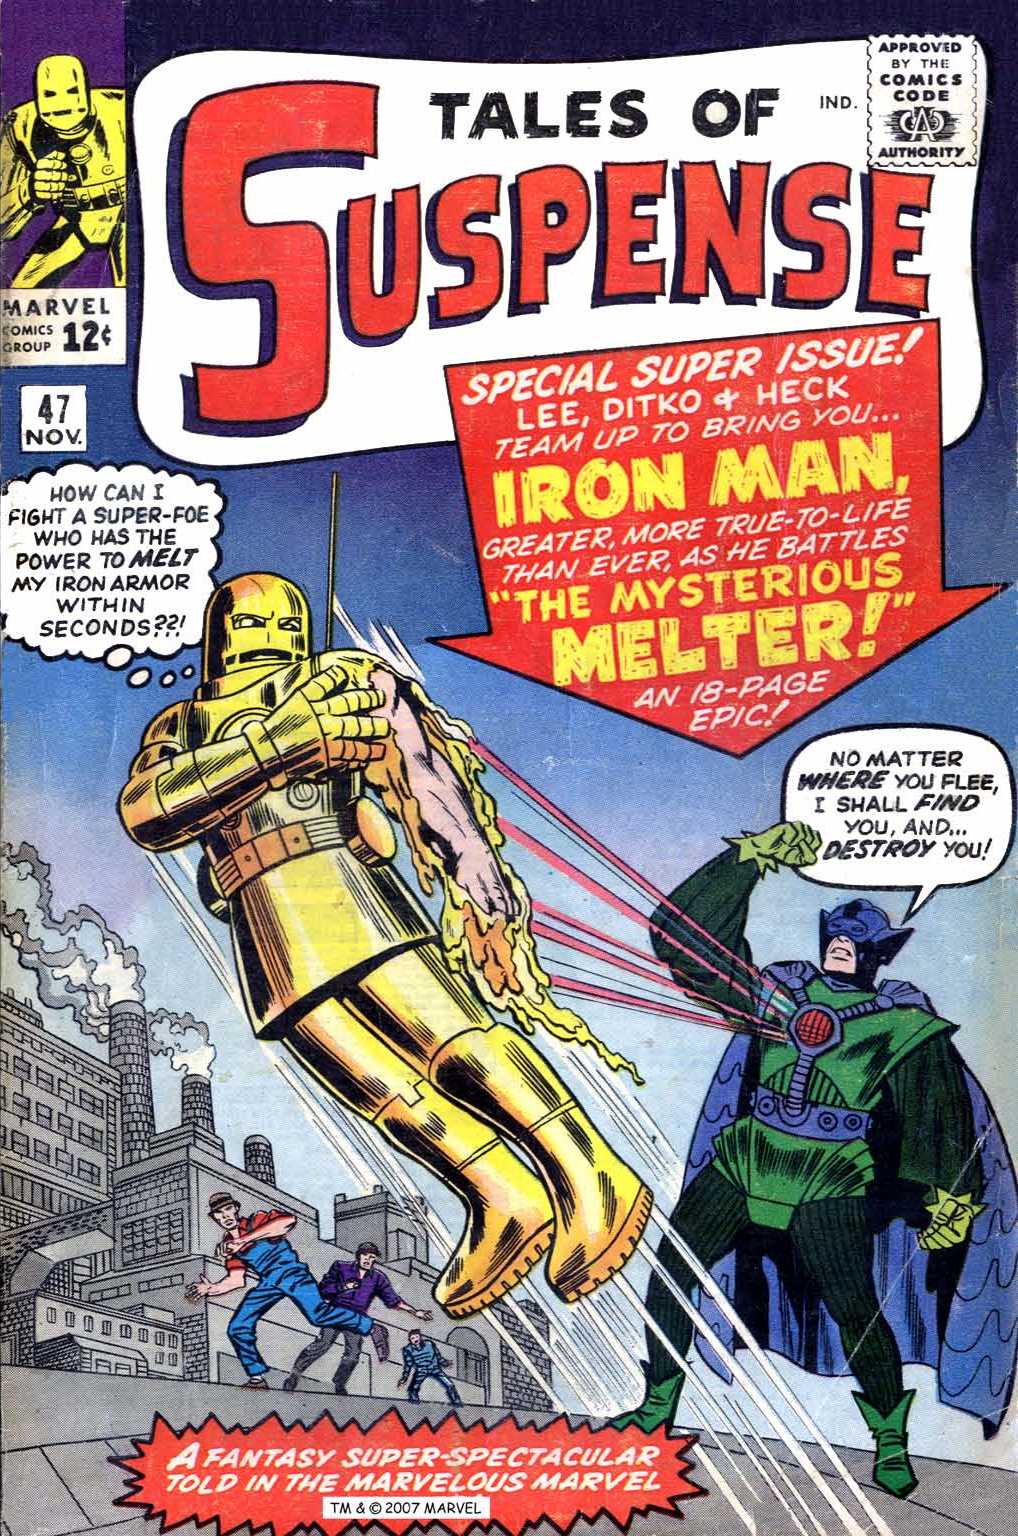 Tales of Suspense #47 (Iron Man vs Mysterious Melter) cover